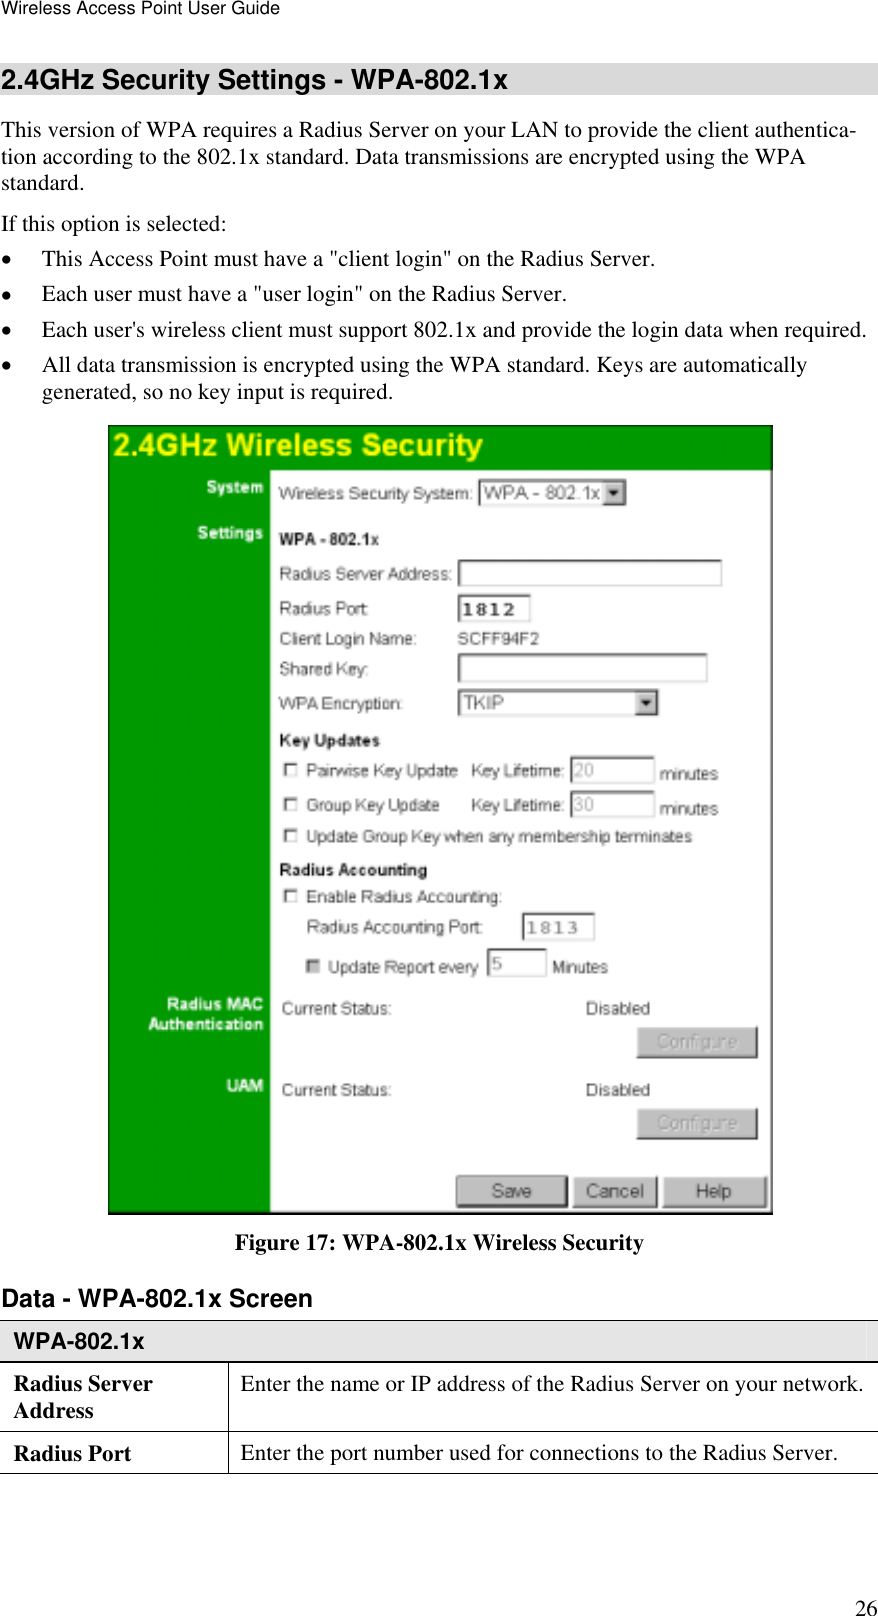 Wireless Access Point User Guide 26 2.4GHz Security Settings - WPA-802.1x This version of WPA requires a Radius Server on your LAN to provide the client authentica-tion according to the 802.1x standard. Data transmissions are encrypted using the WPA standard.  If this option is selected: •  This Access Point must have a &quot;client login&quot; on the Radius Server.  •  Each user must have a &quot;user login&quot; on the Radius Server.  •  Each user&apos;s wireless client must support 802.1x and provide the login data when required.  •  All data transmission is encrypted using the WPA standard. Keys are automatically generated, so no key input is required.  Figure 17: WPA-802.1x Wireless Security Data - WPA-802.1x Screen  WPA-802.1x Radius Server Address  Enter the name or IP address of the Radius Server on your network.Radius Port  Enter the port number used for connections to the Radius Server. 